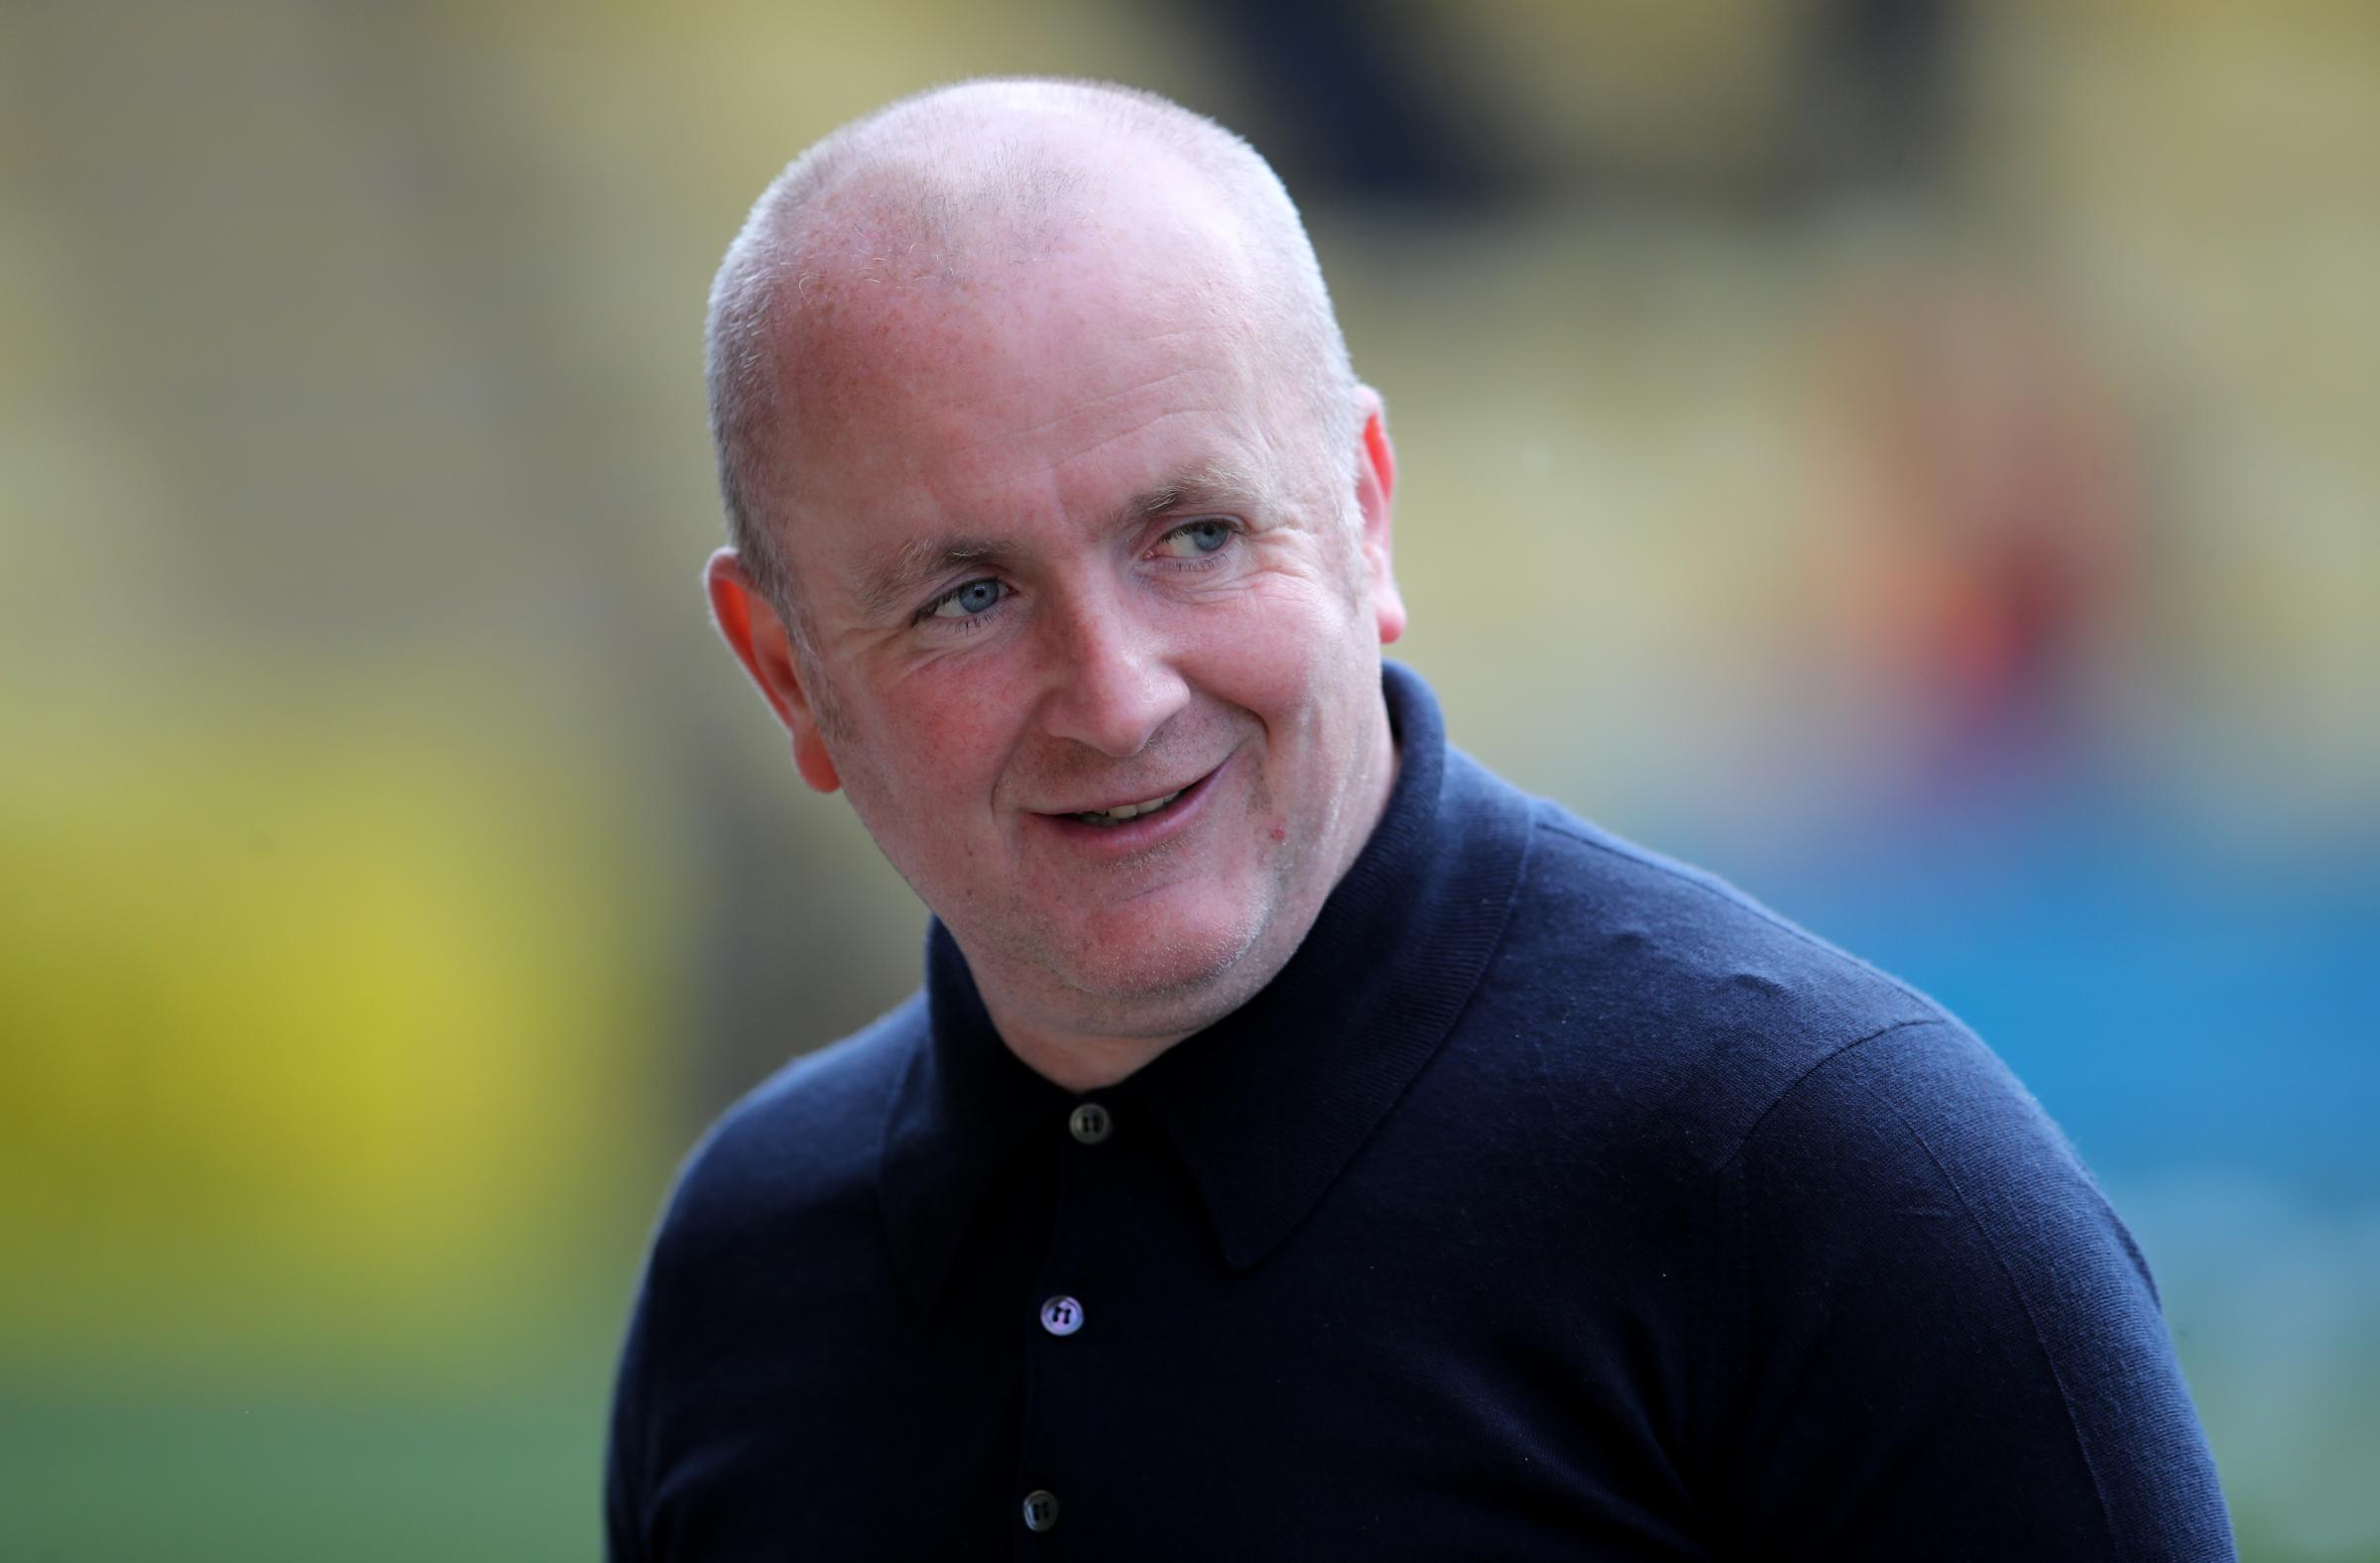 Livingston £200,000 VAR and government payment to kill transfer plans